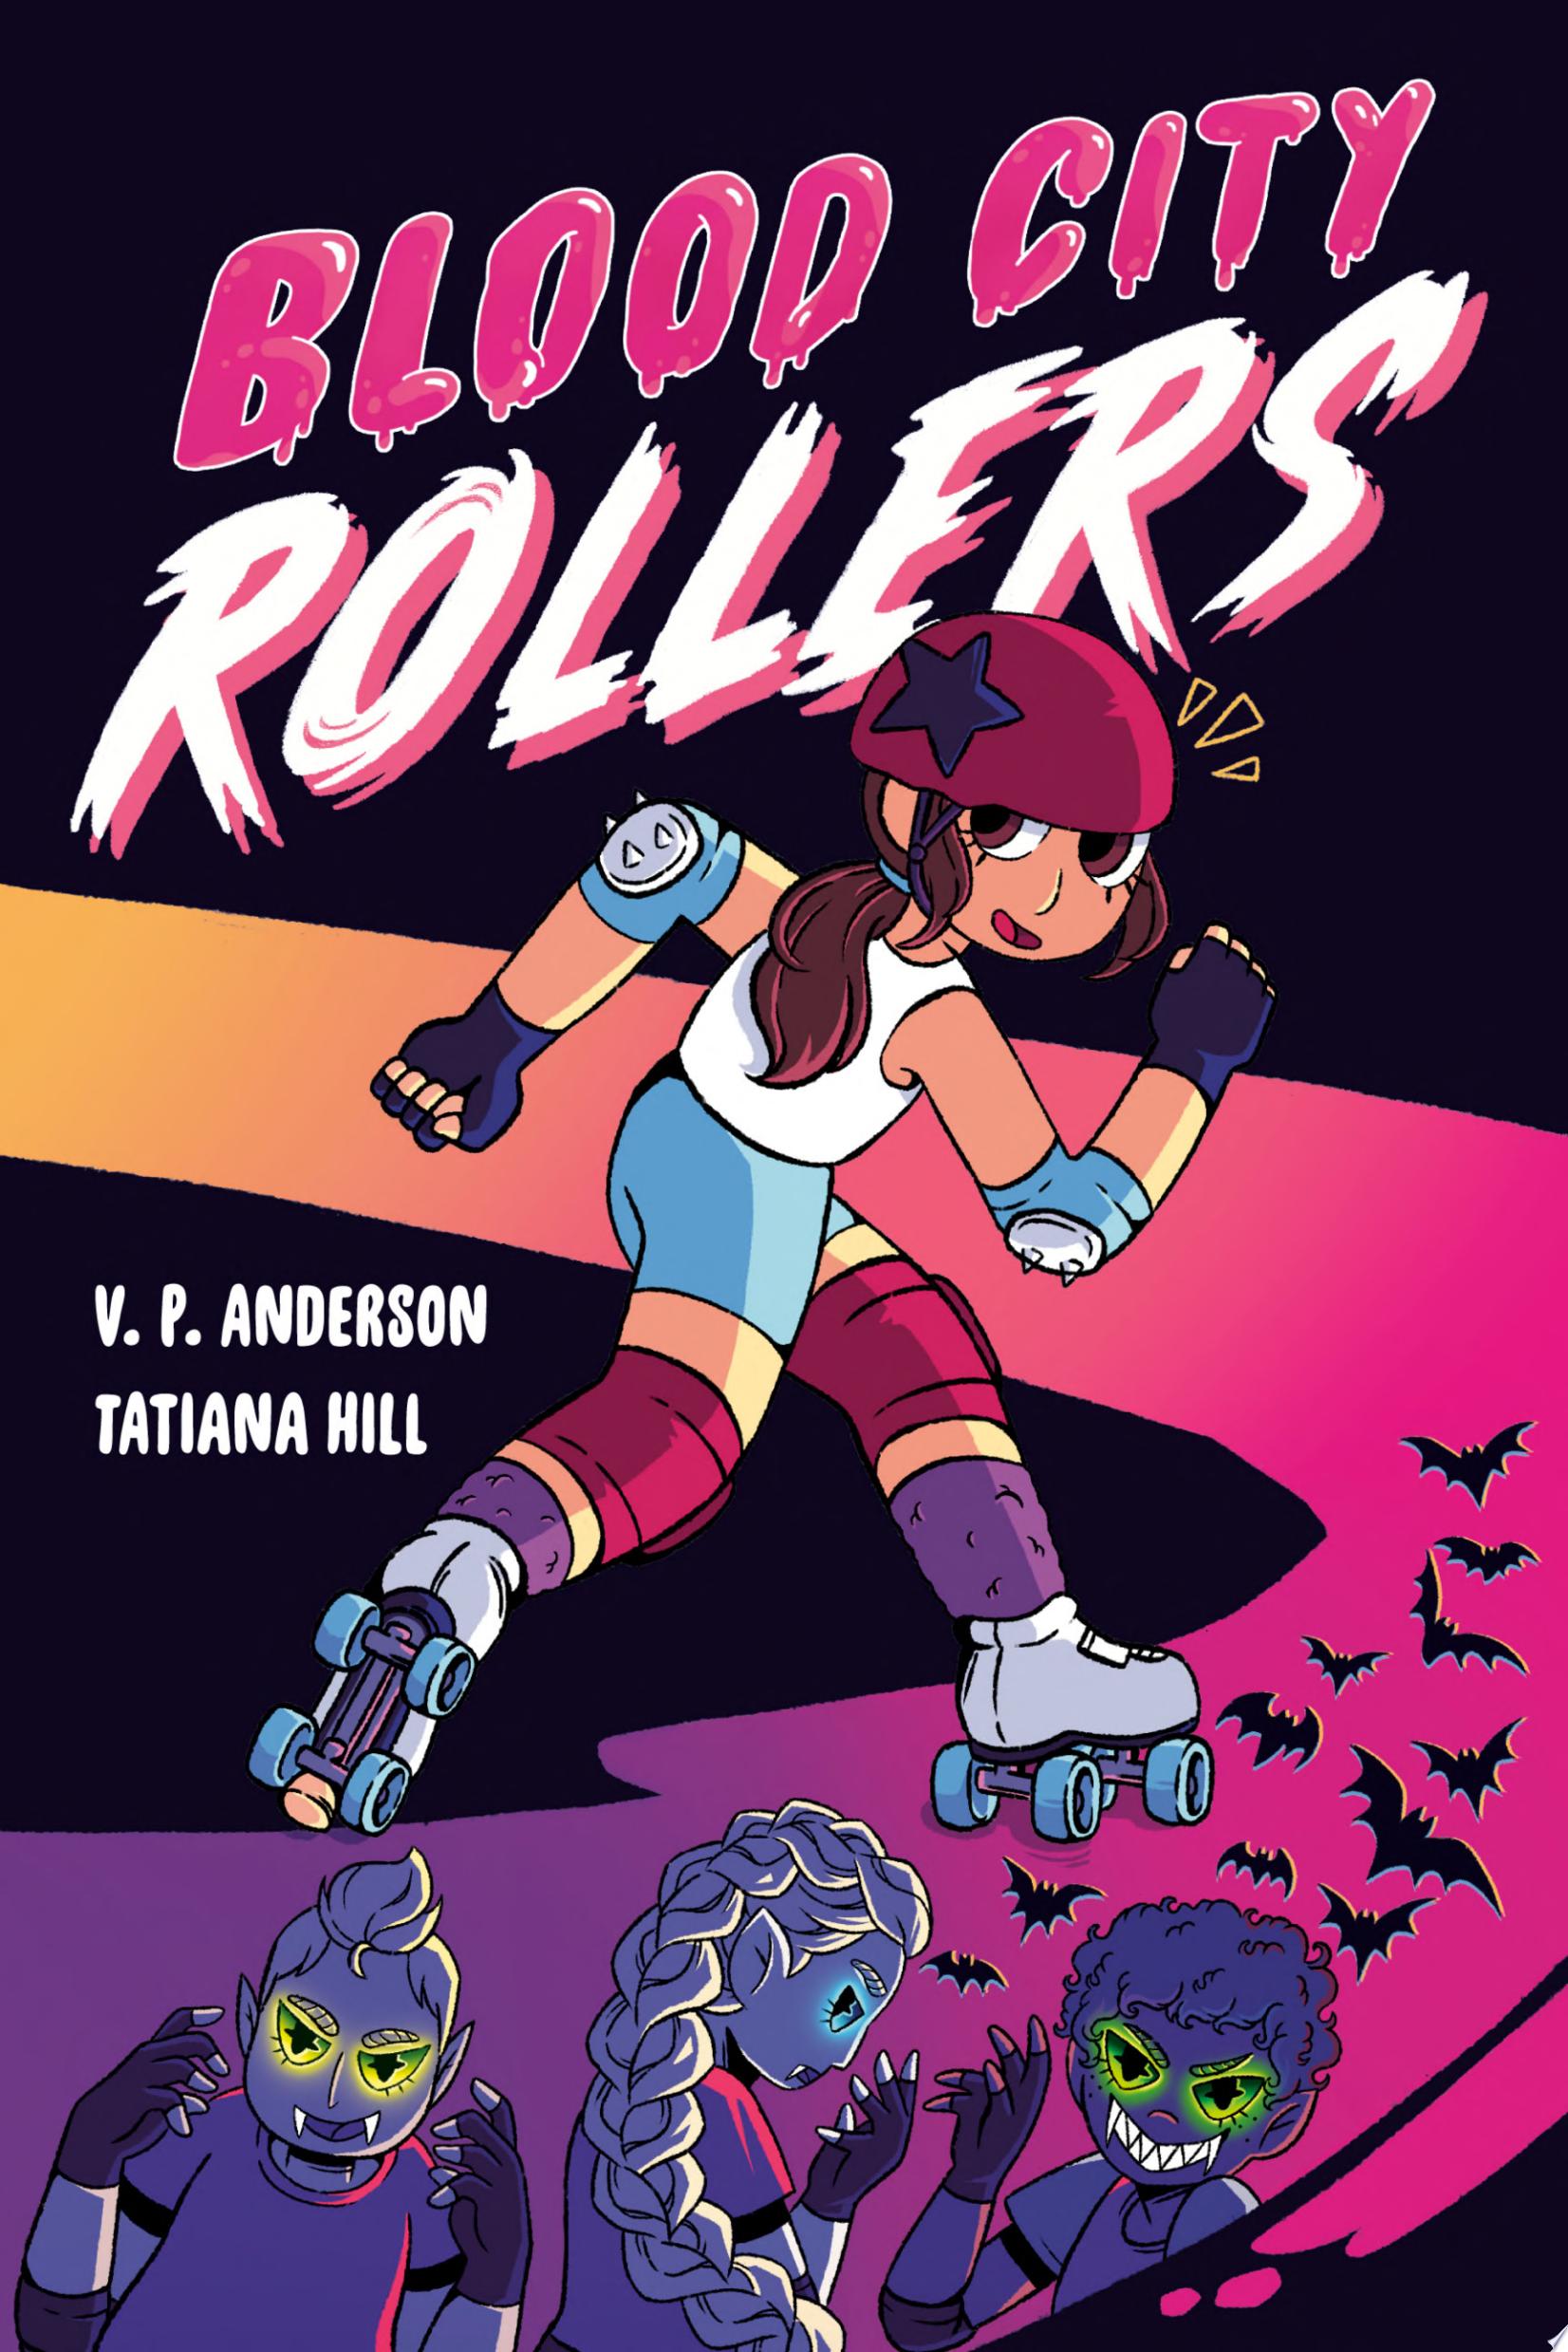 Image for "Blood City Rollers"